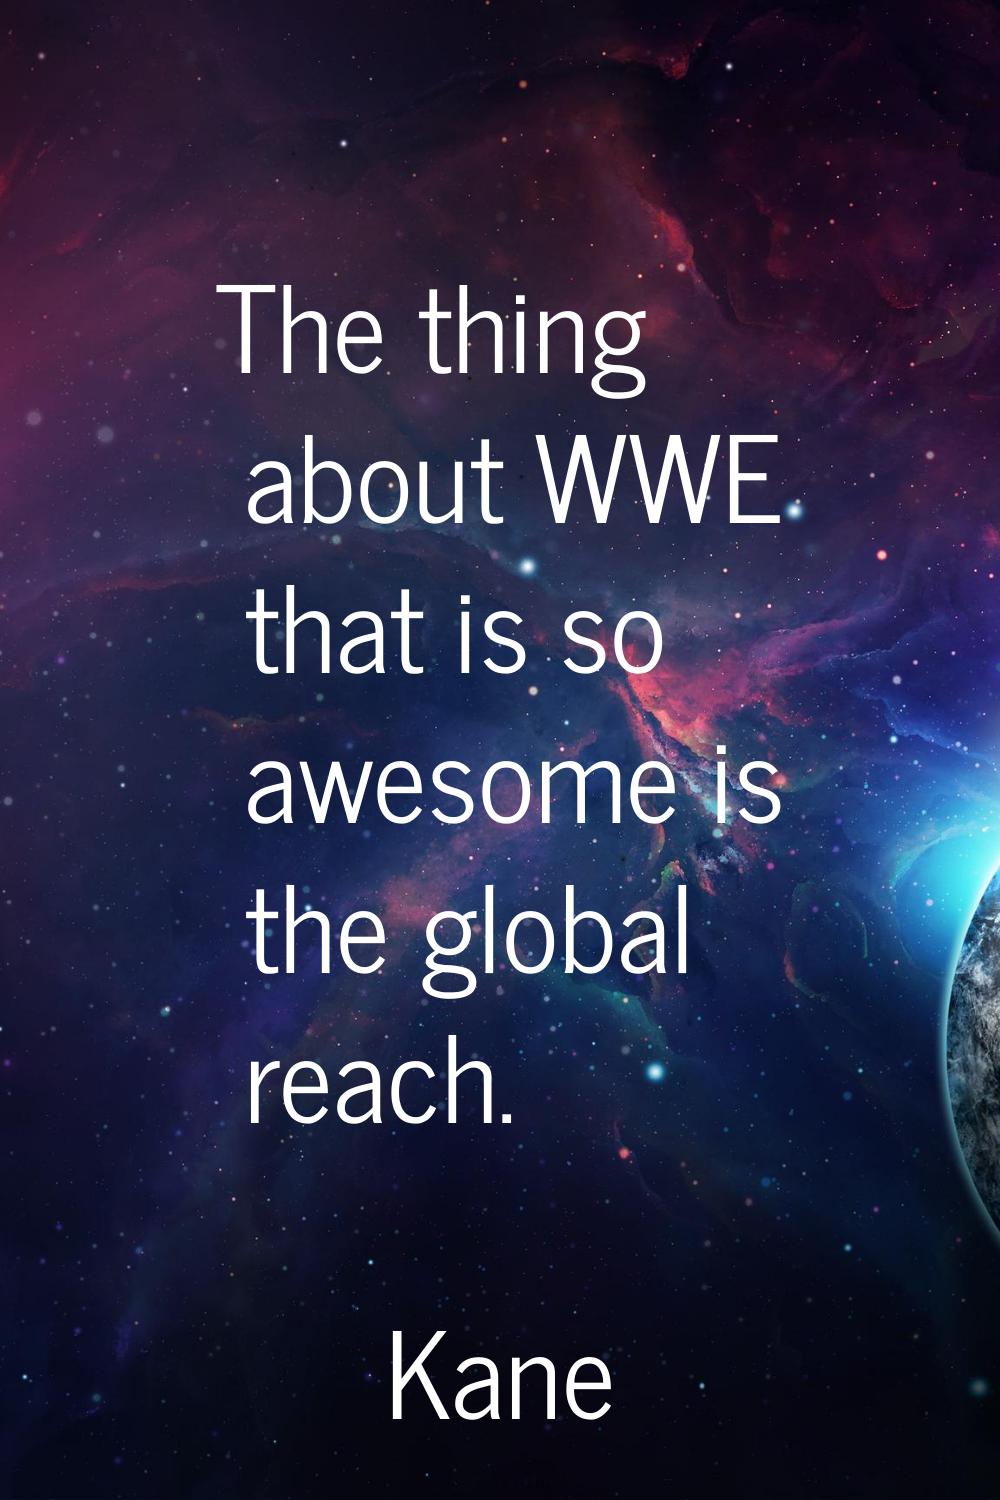 The thing about WWE that is so awesome is the global reach.